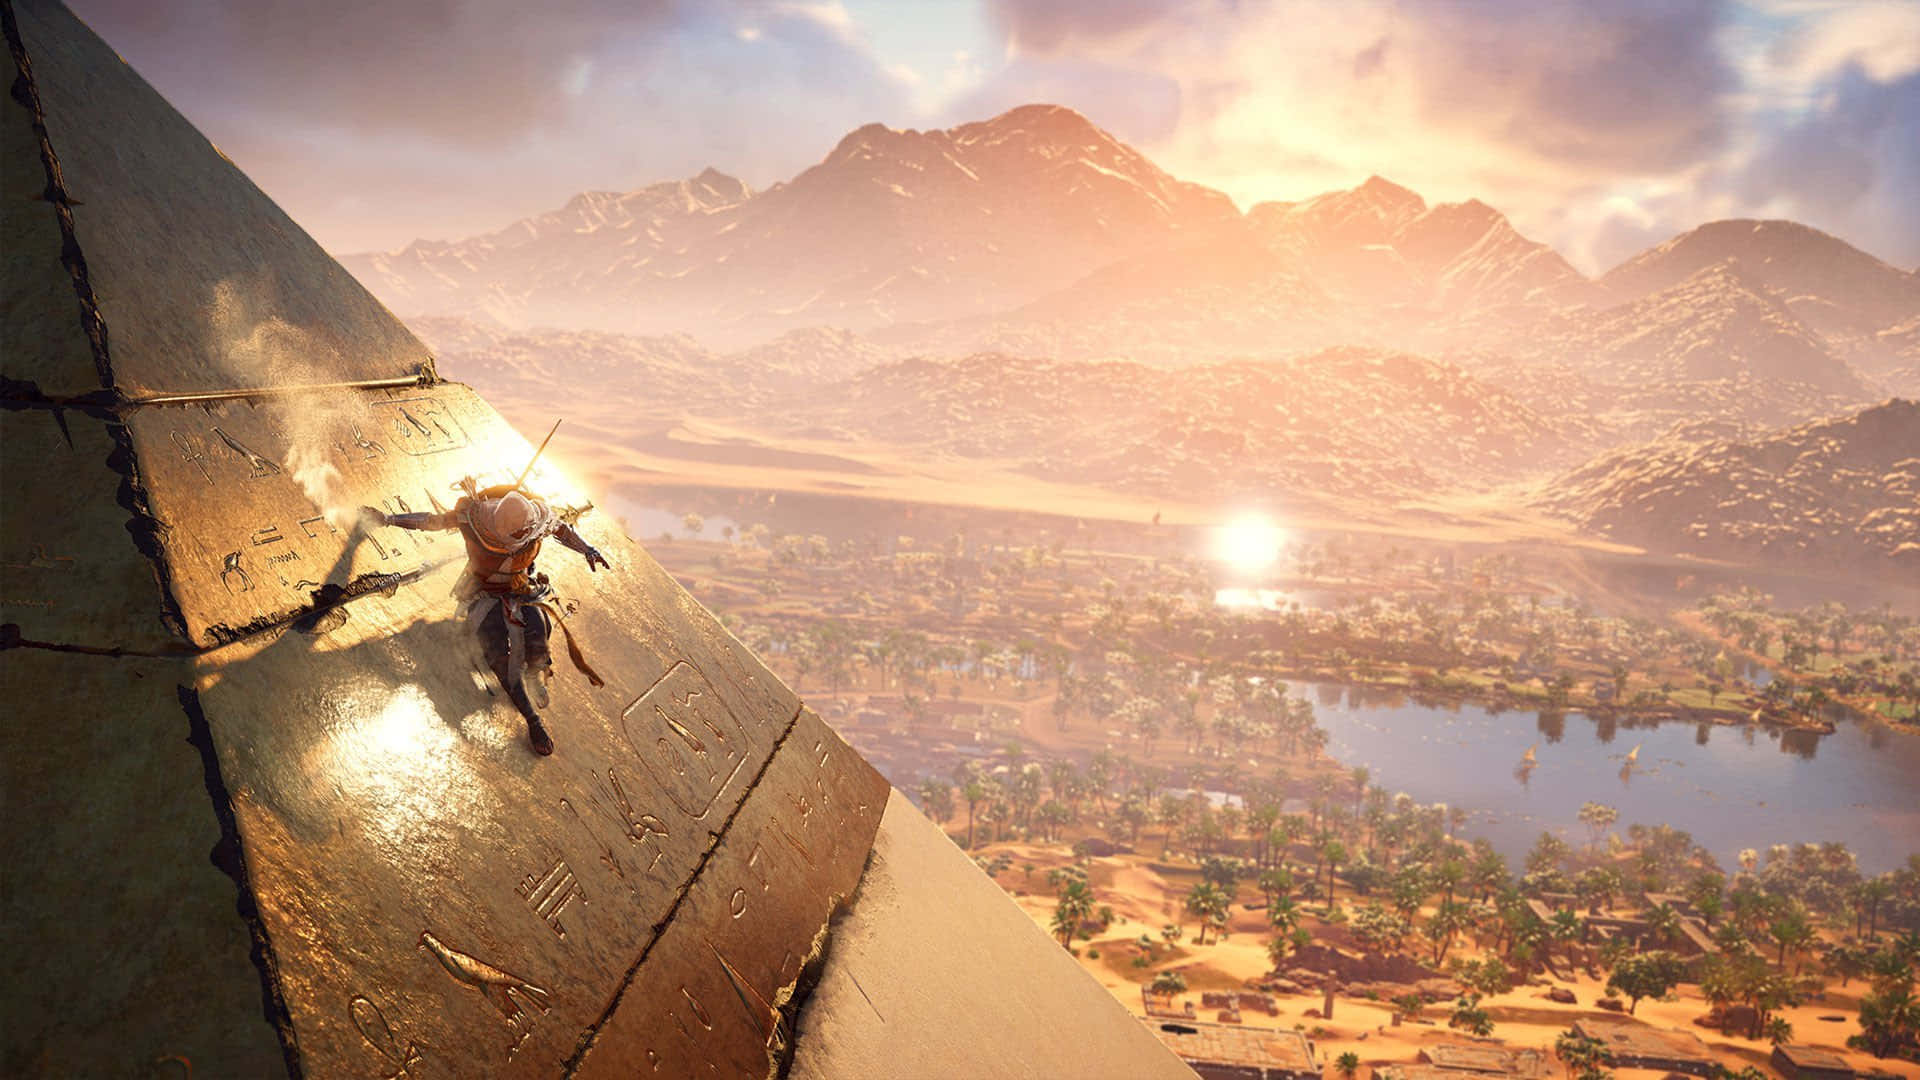 Stunning Assassin's Creed gaming scene in action